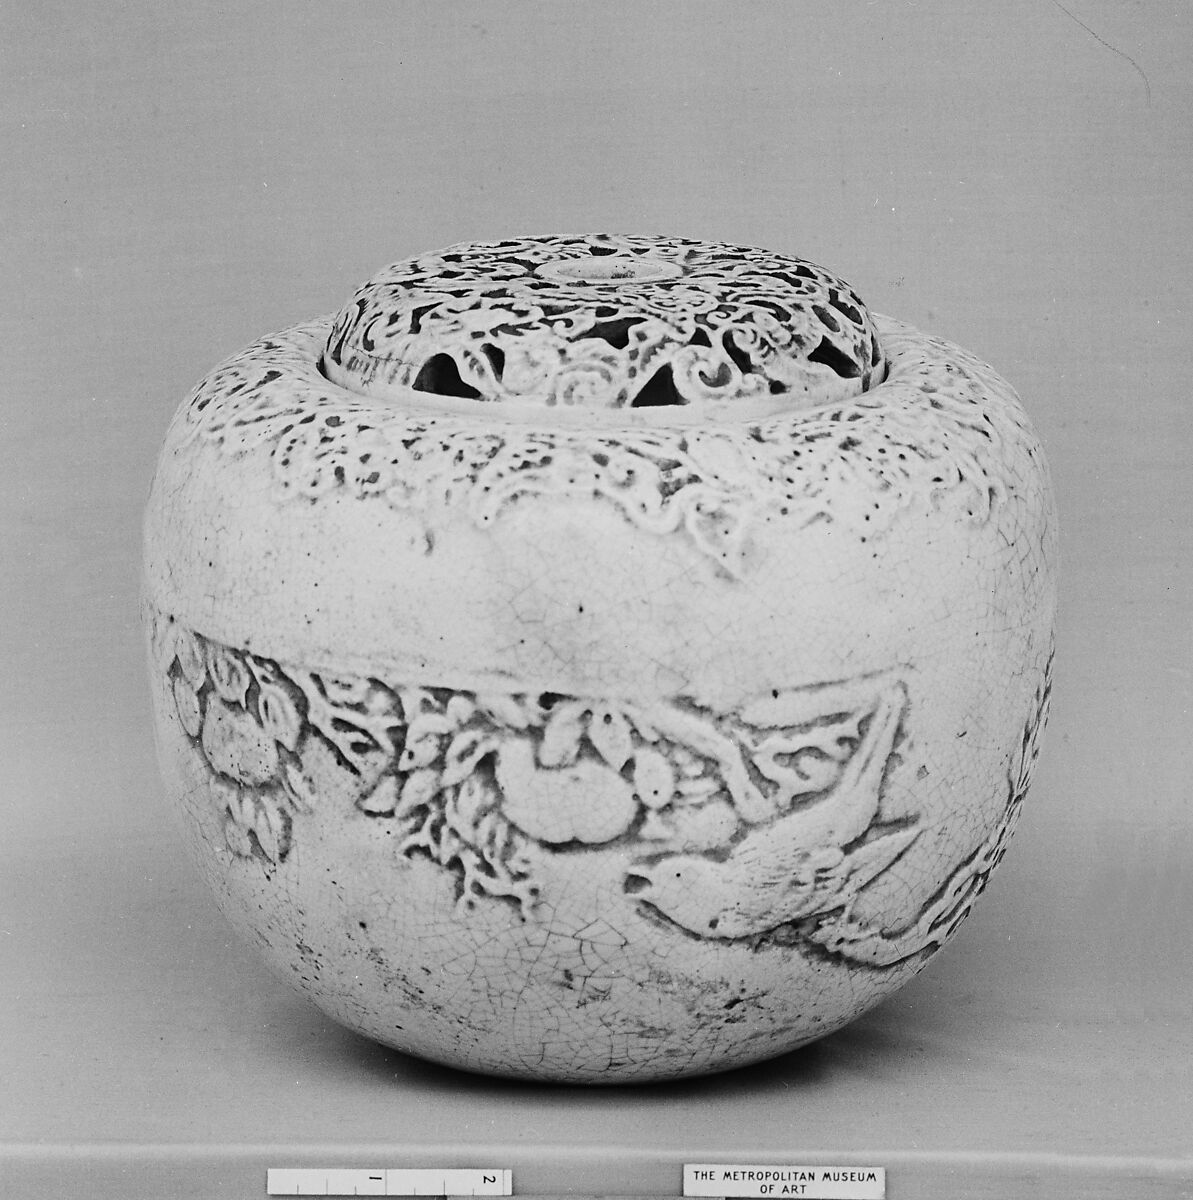 Mosquito Smoker, Covered with crackled glaze over a moulded design (Sanuki ware, Takamatsu type), Japan 